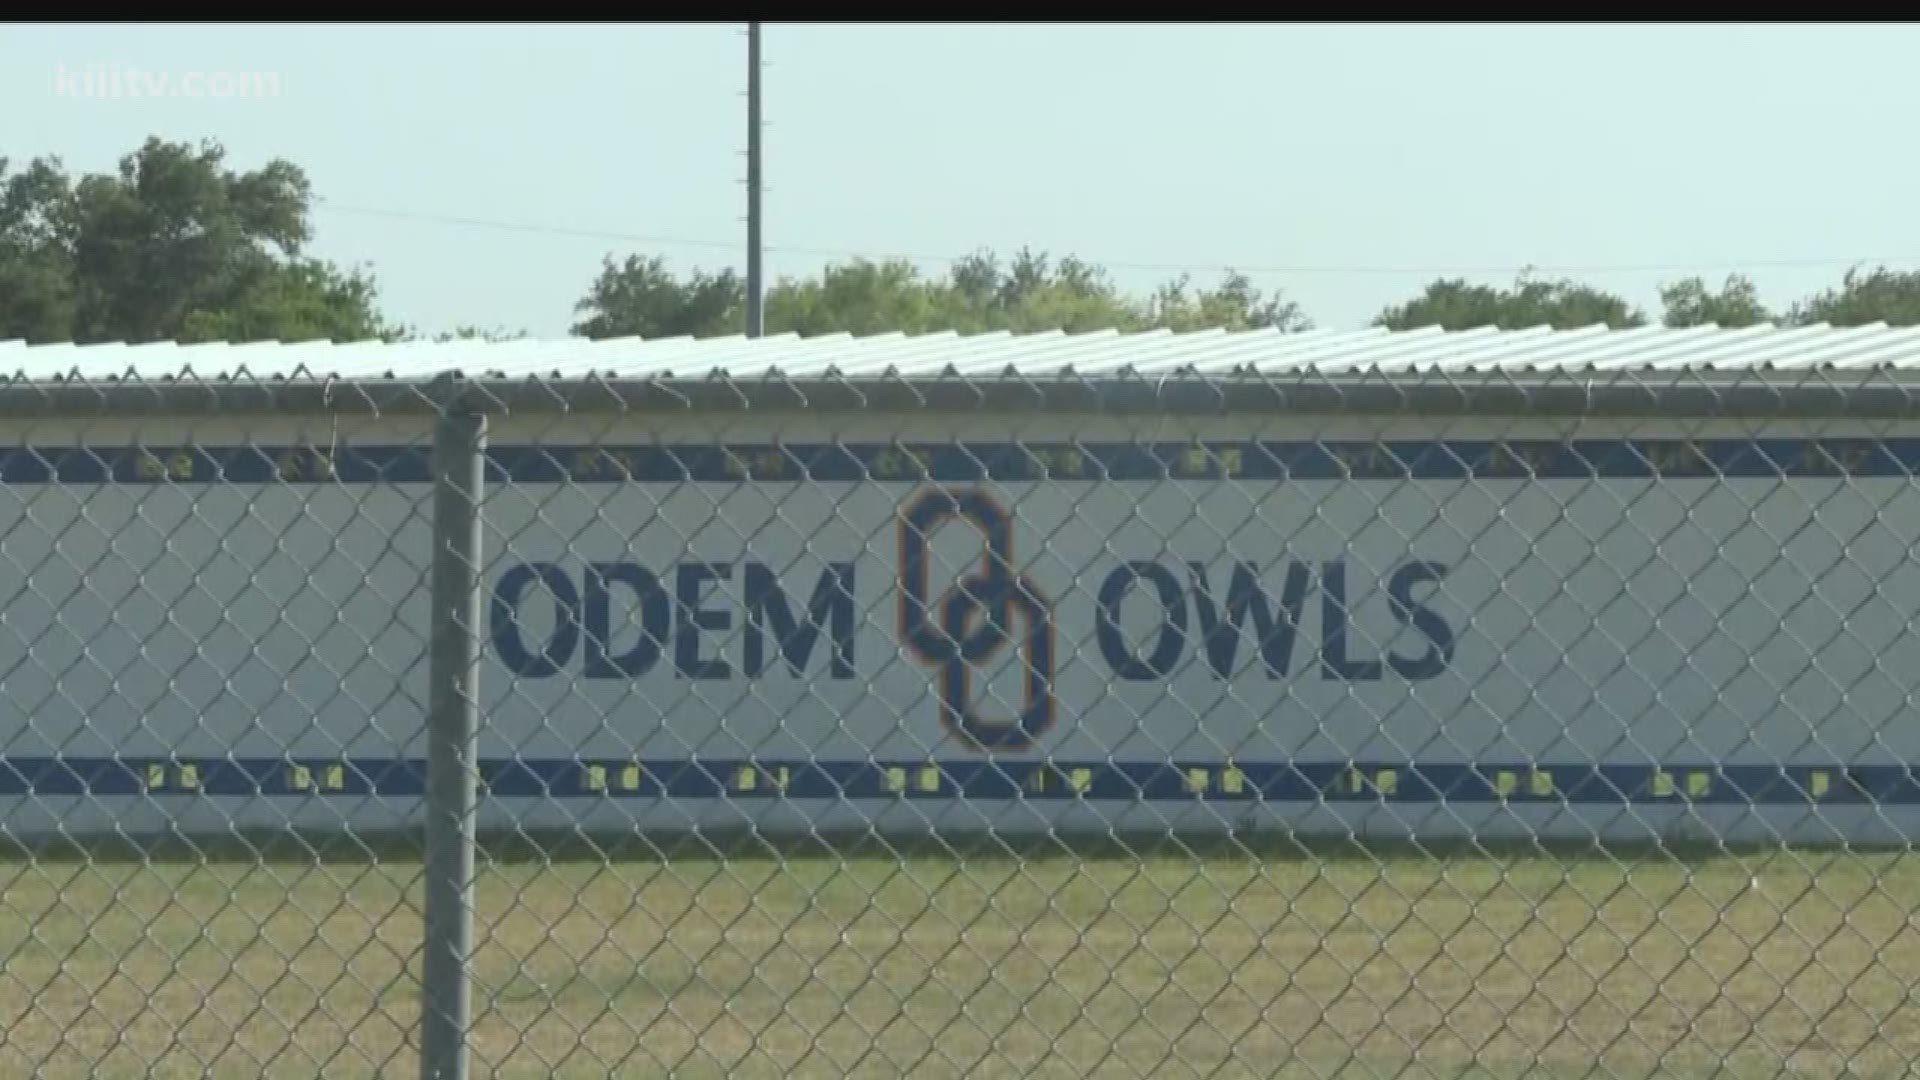 The Odem Independent School District's latchkey program was first funded by a grant, but when that discontinued the district decided to carry on as a parent-paid program.